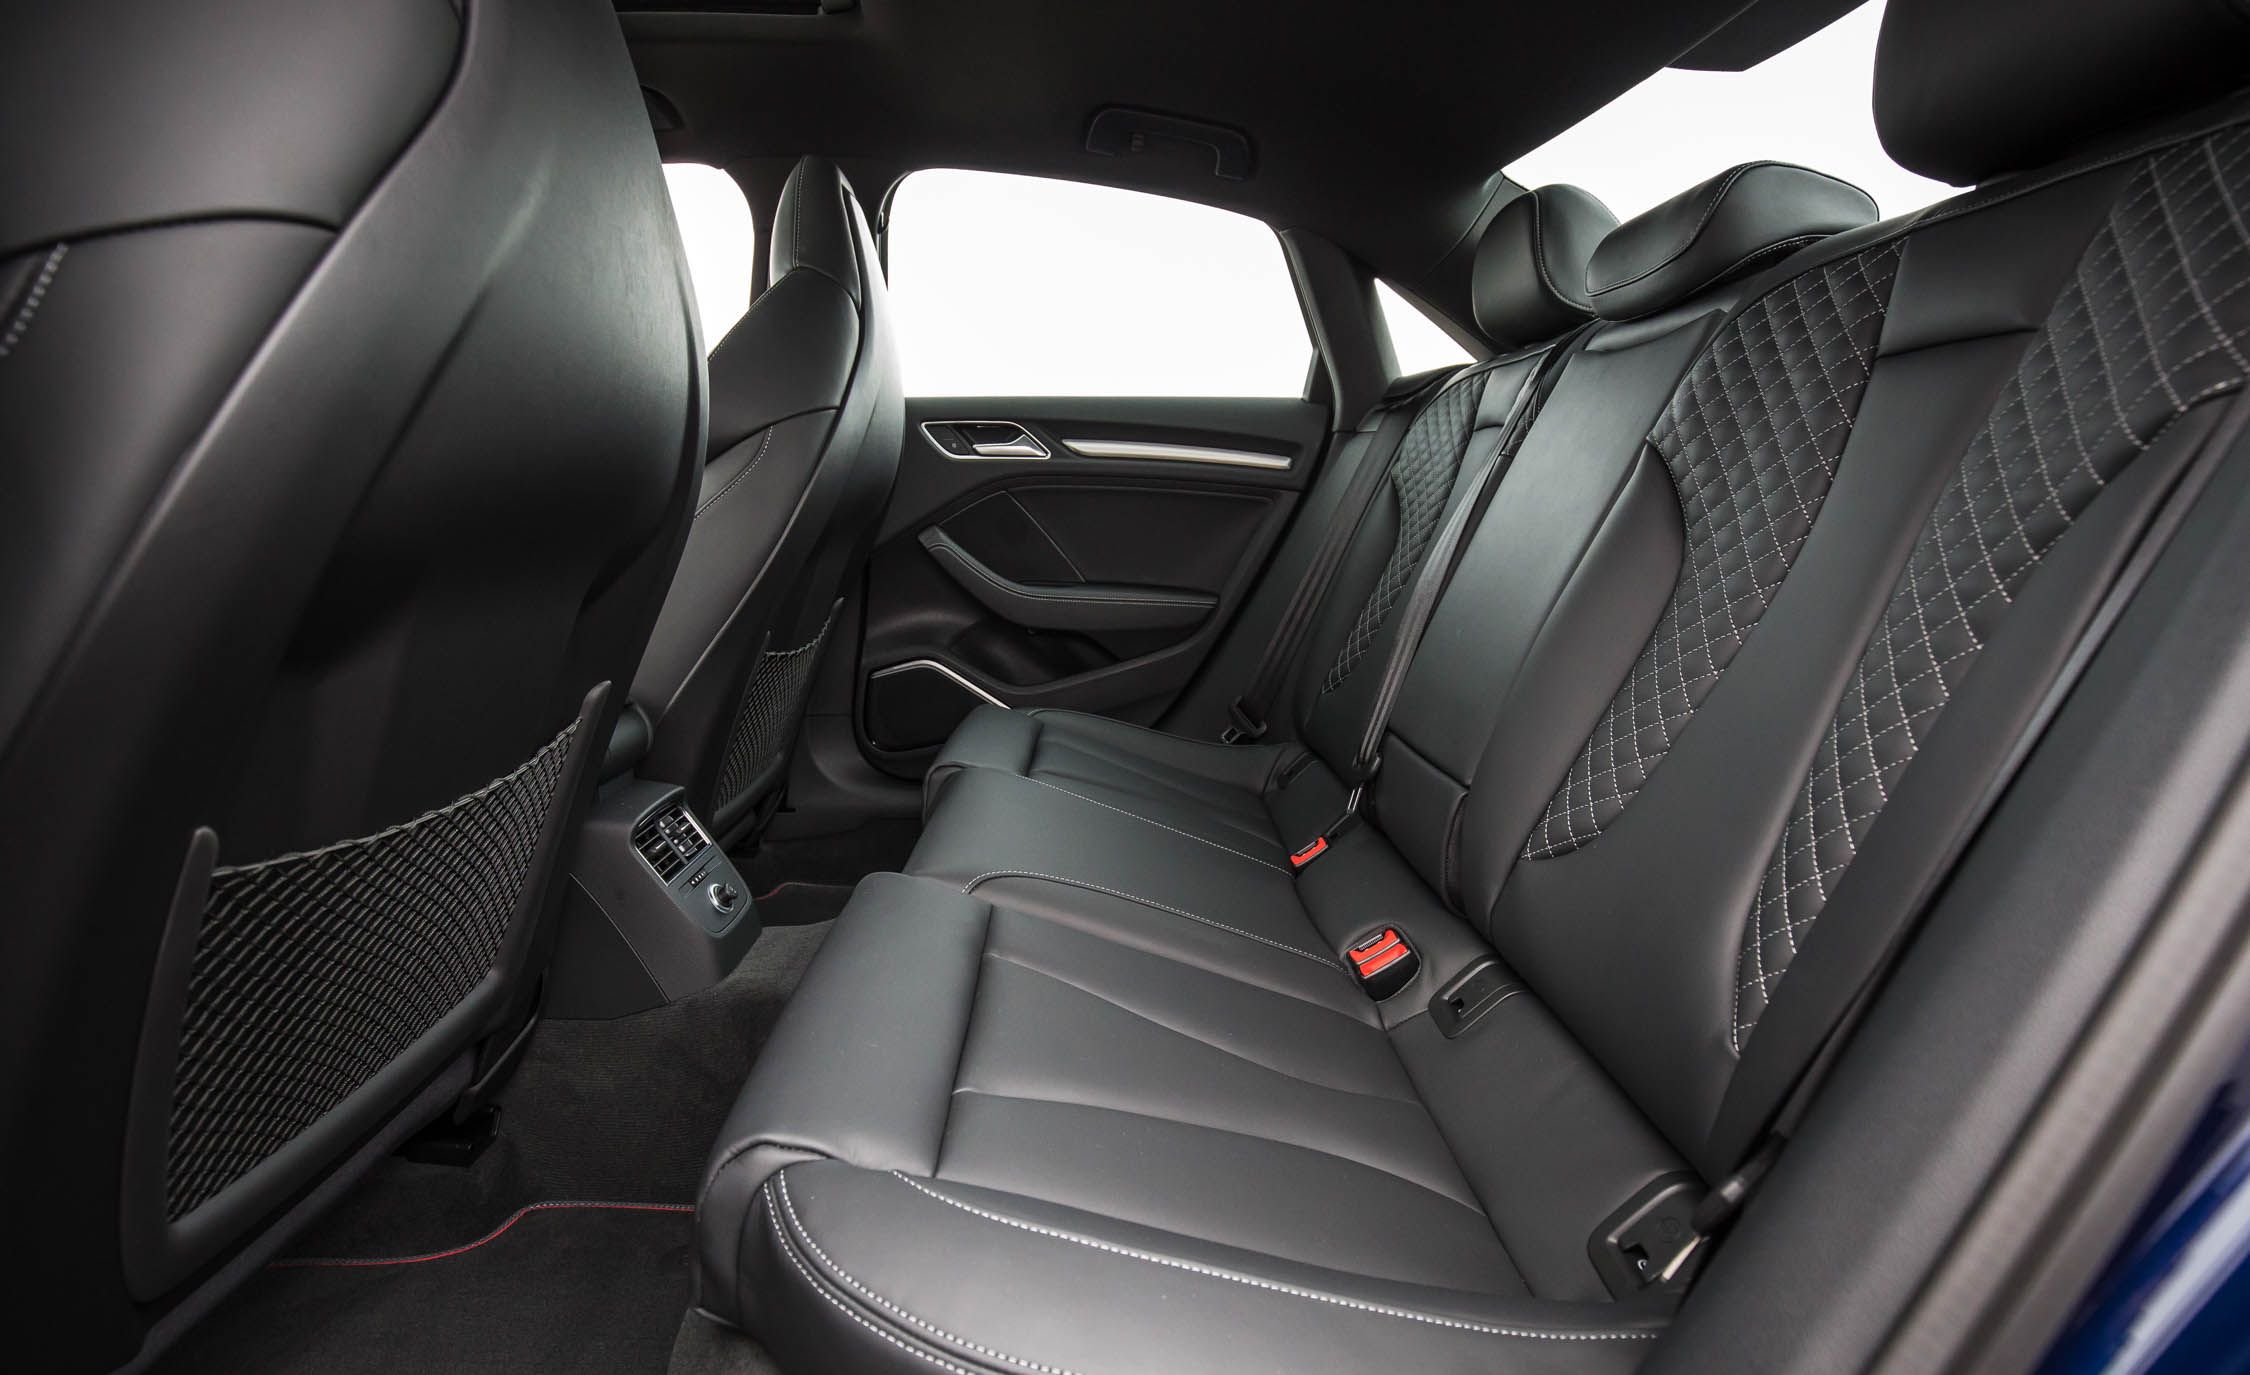 2017 Audi S3 Interior Seats Rear (View 29 of 50)